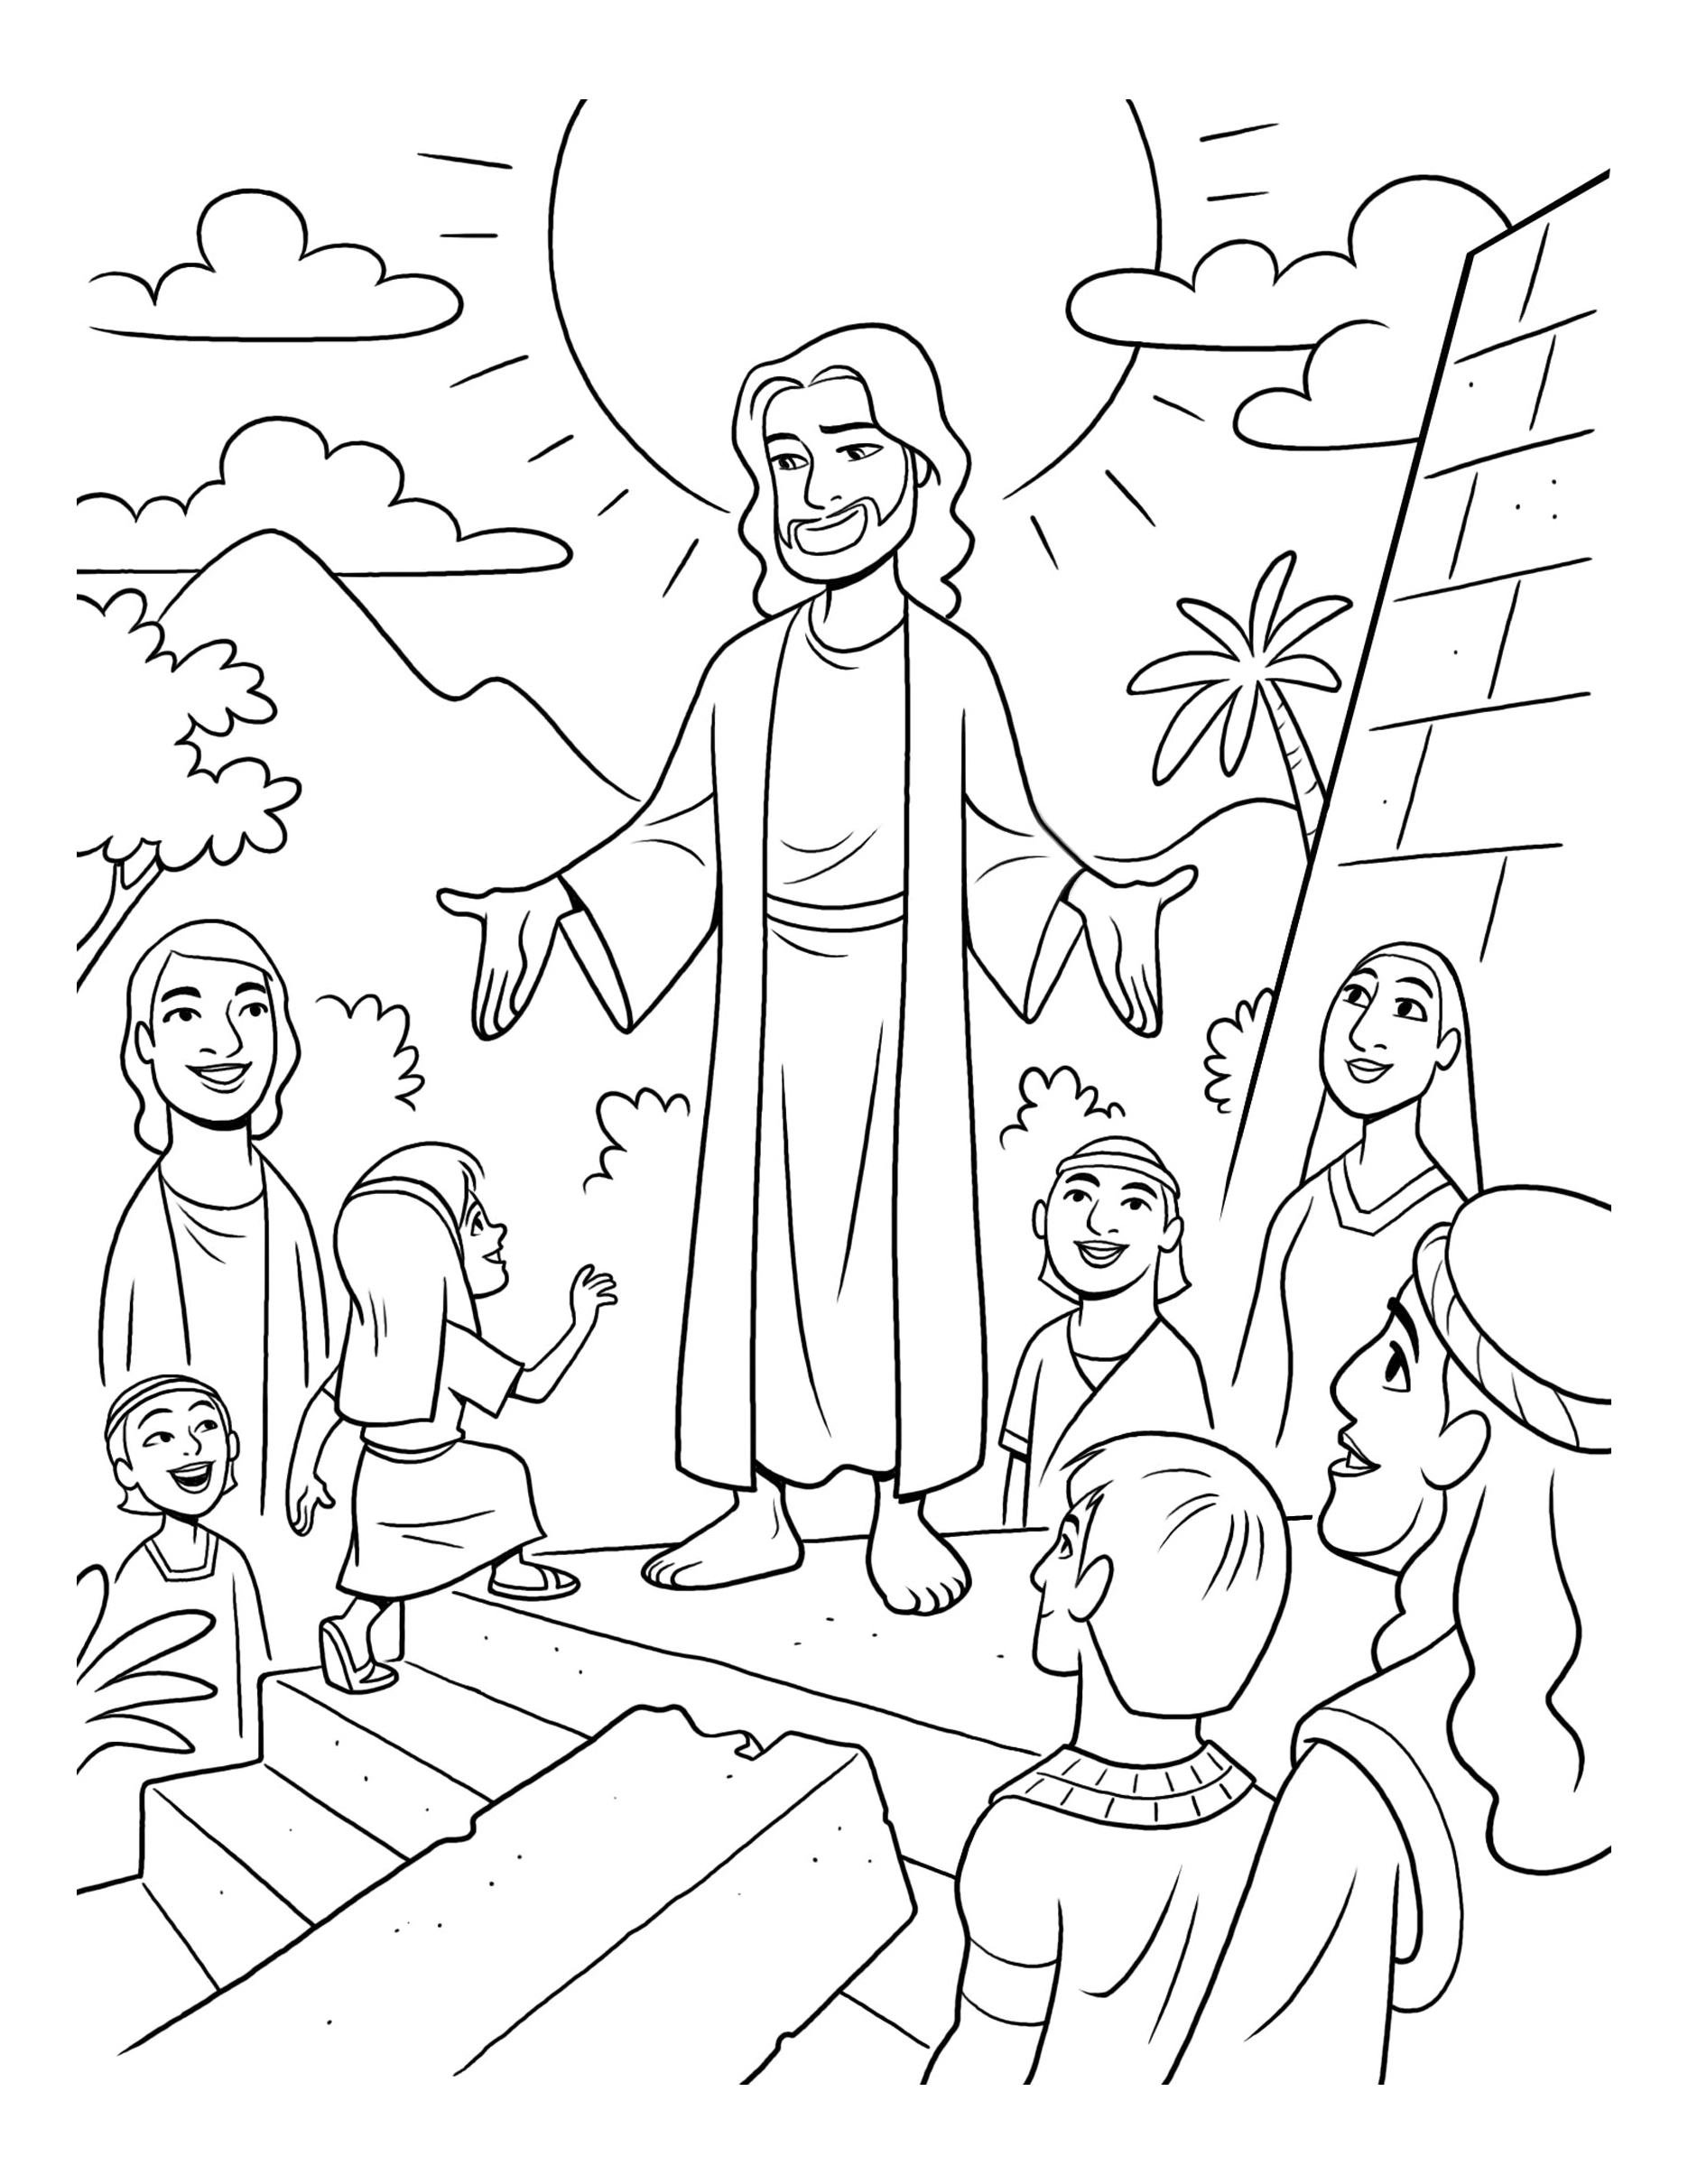 Christ Visiting the Americas